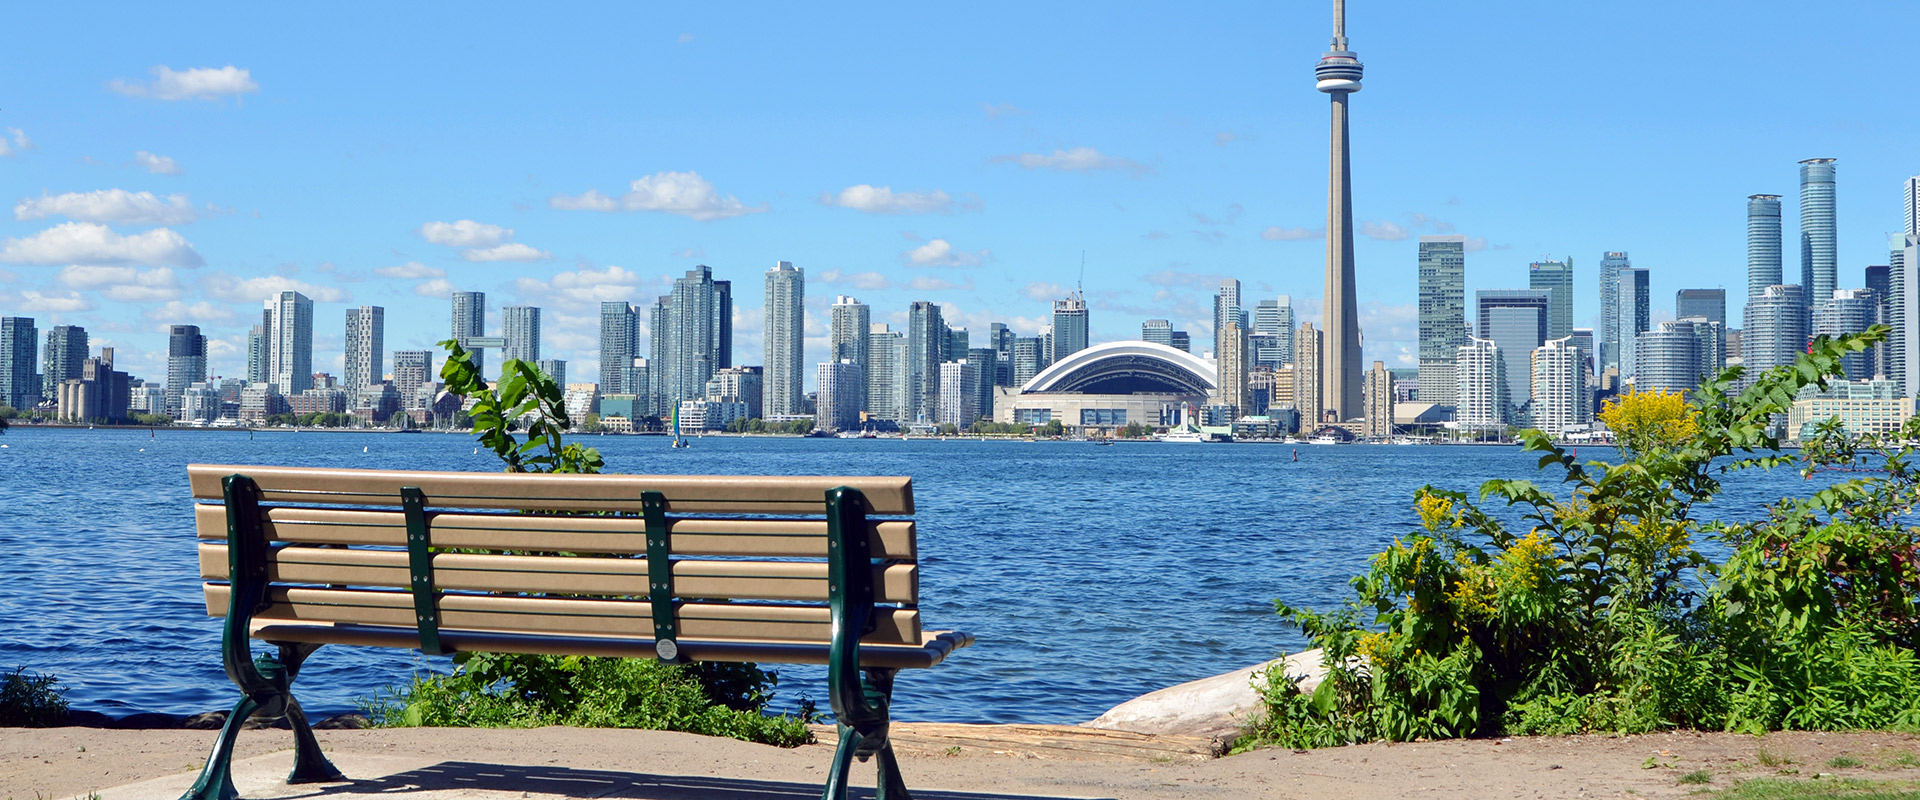 Park bench in the foreground with lake and Toronto city skyline in the background on a sunny day